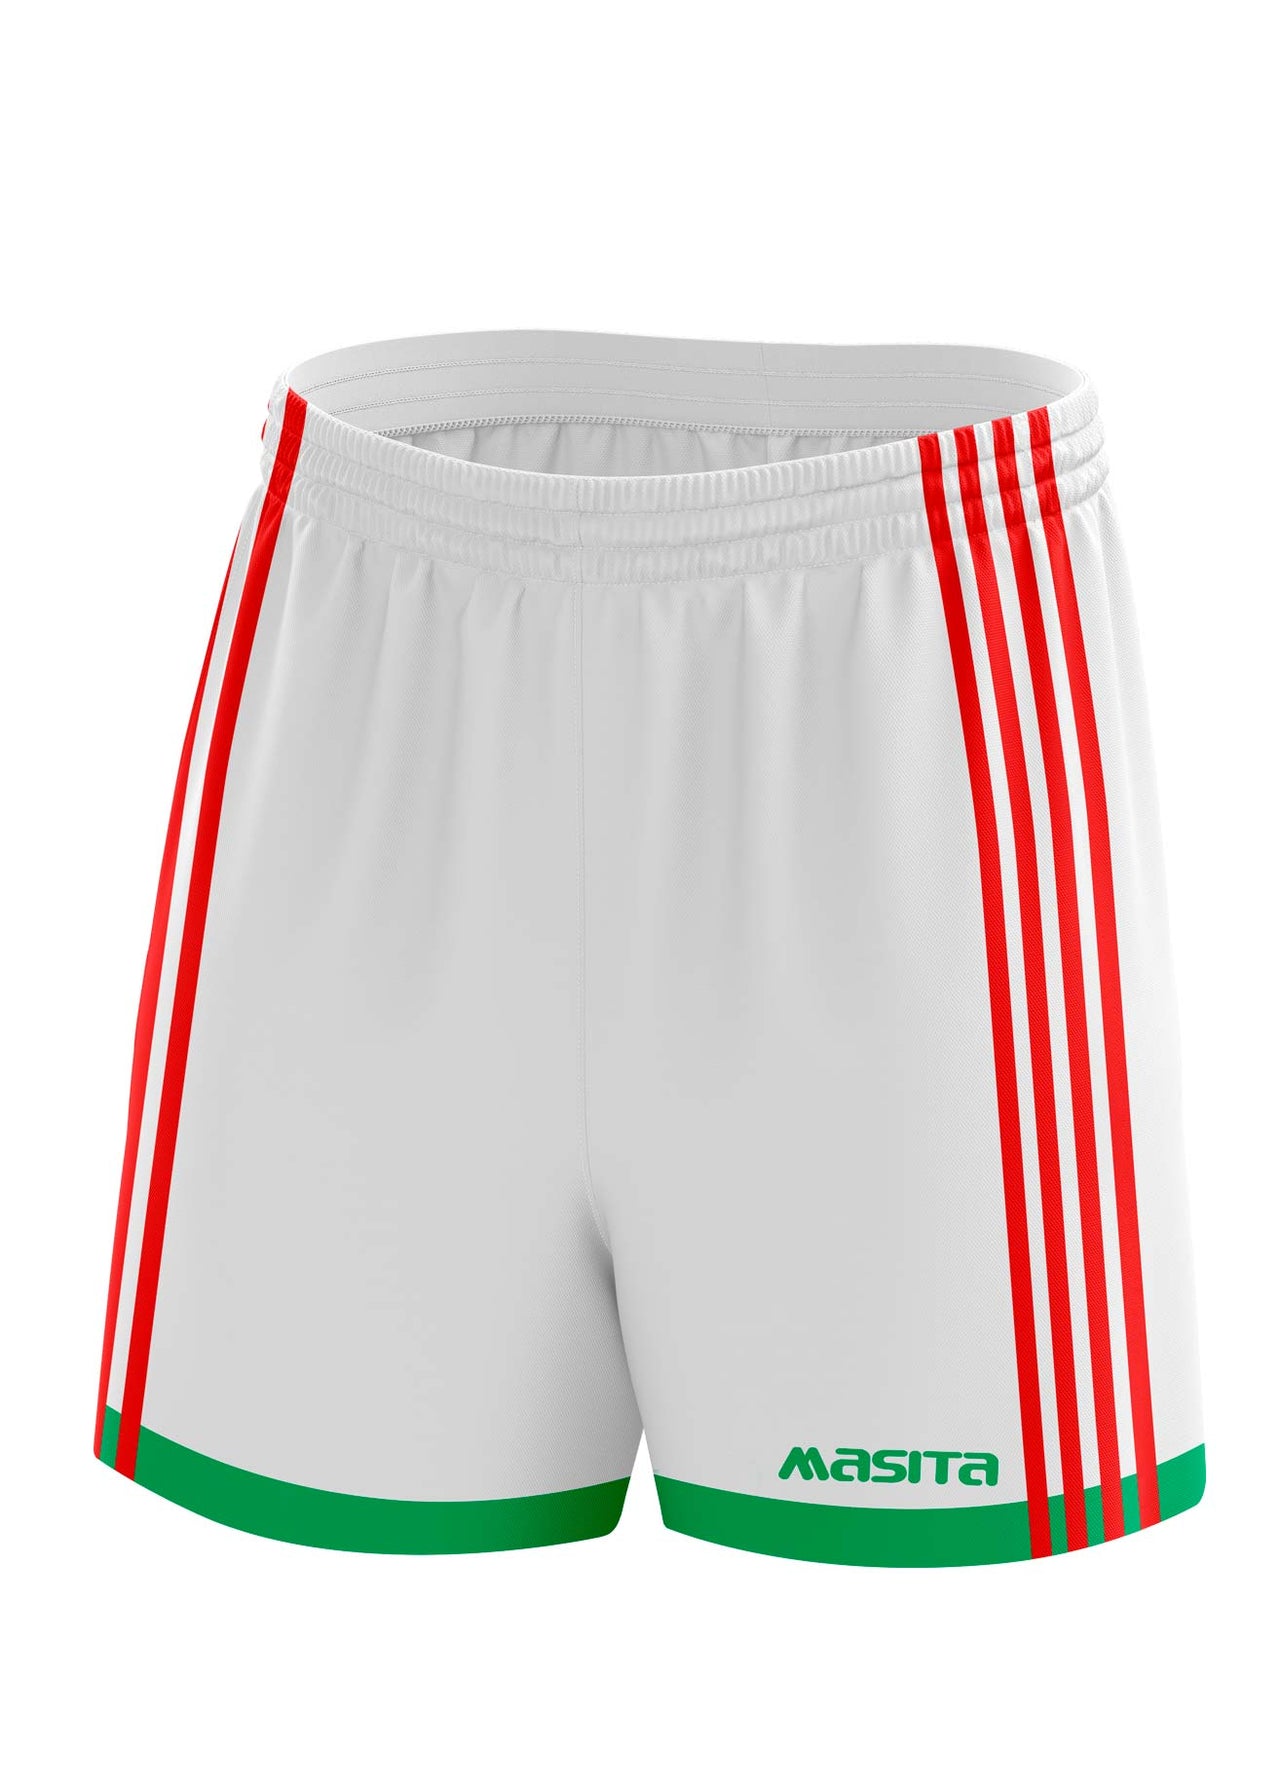 Solo Gaelic Shorts White/Green/Red Kids